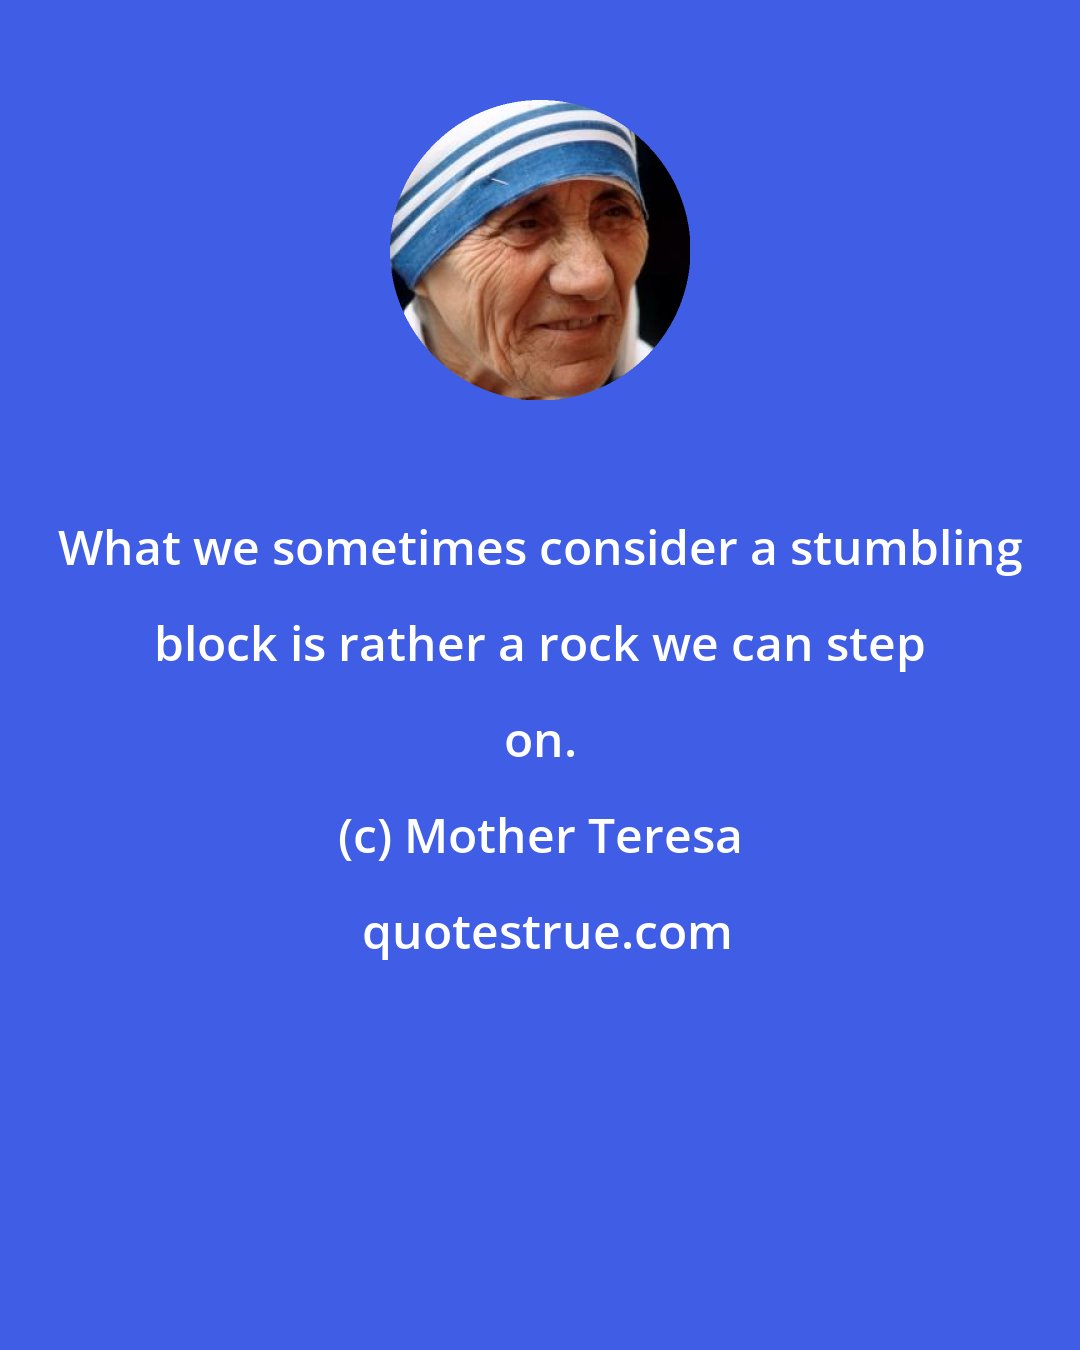 Mother Teresa: What we sometimes consider a stumbling block is rather a rock we can step on.